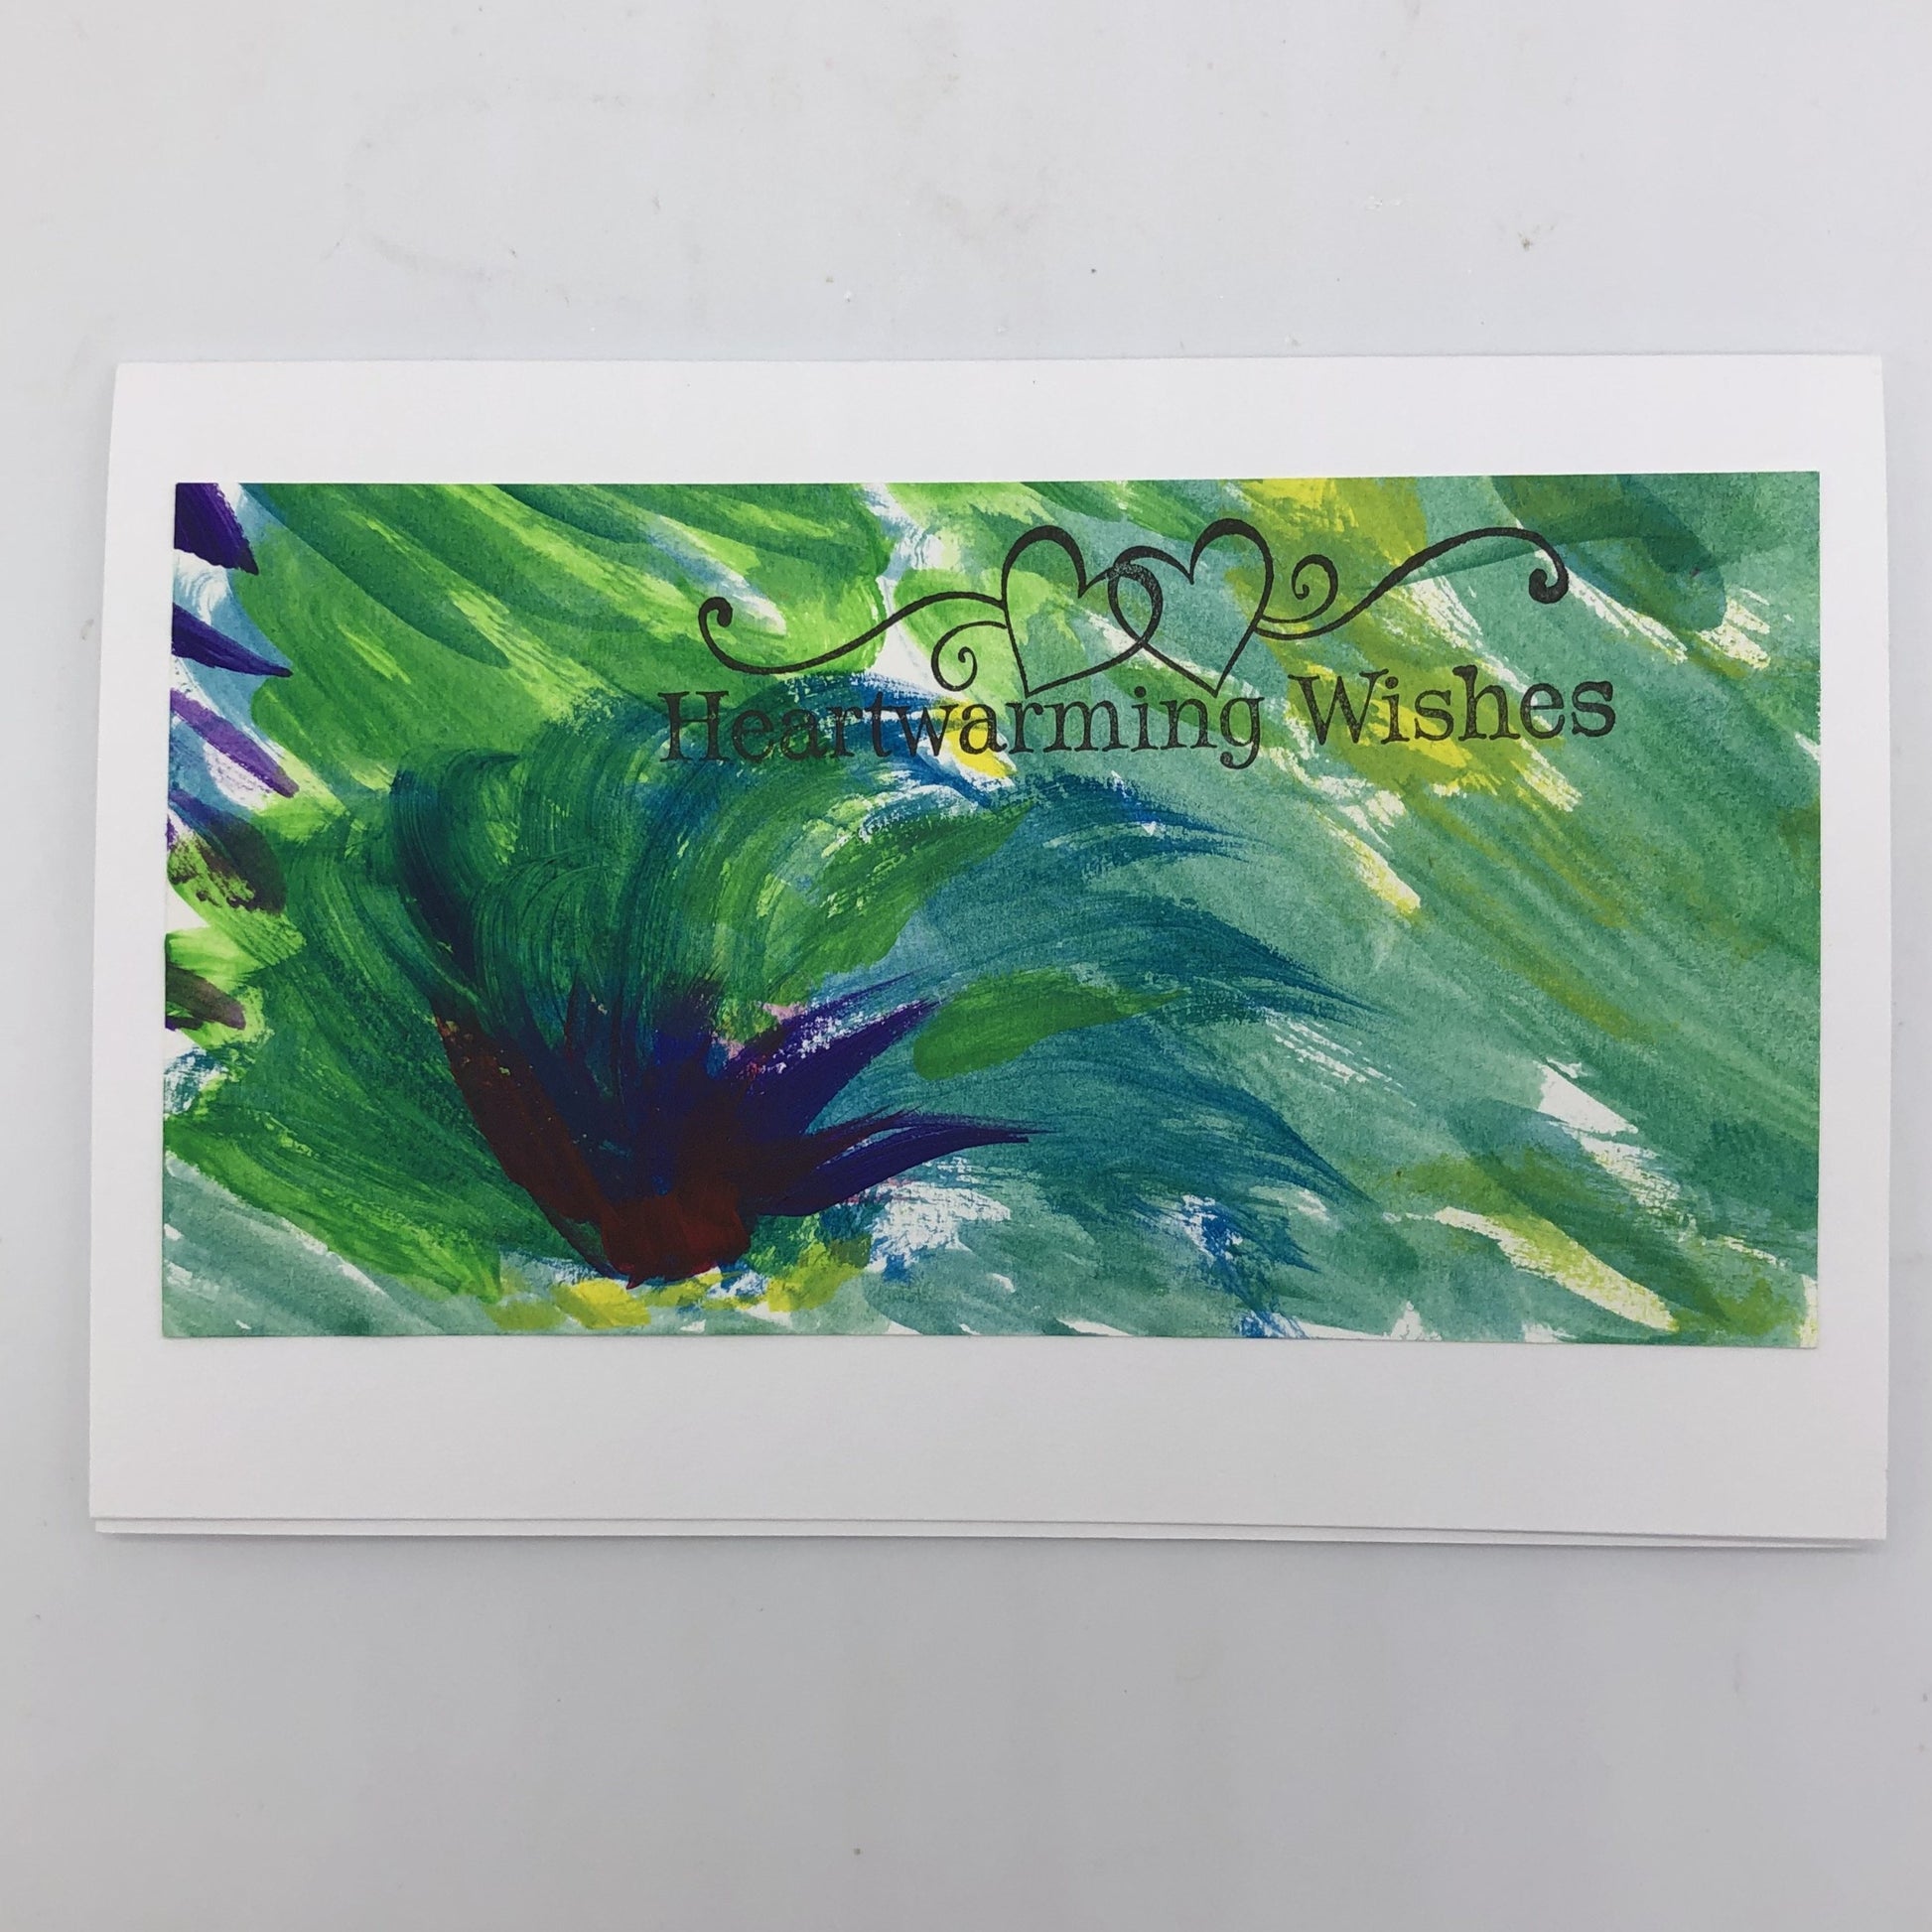 White greeting card with shade of blue and green painted on top is lines.  There is a dark blue cluster resembling a tuft of grass in the lower left hand corner.  On the top portion of the painting, flush to the right is the stamp in black that says Heartwarming Wishes and has two outlined hearts touching with flourishes to each side.